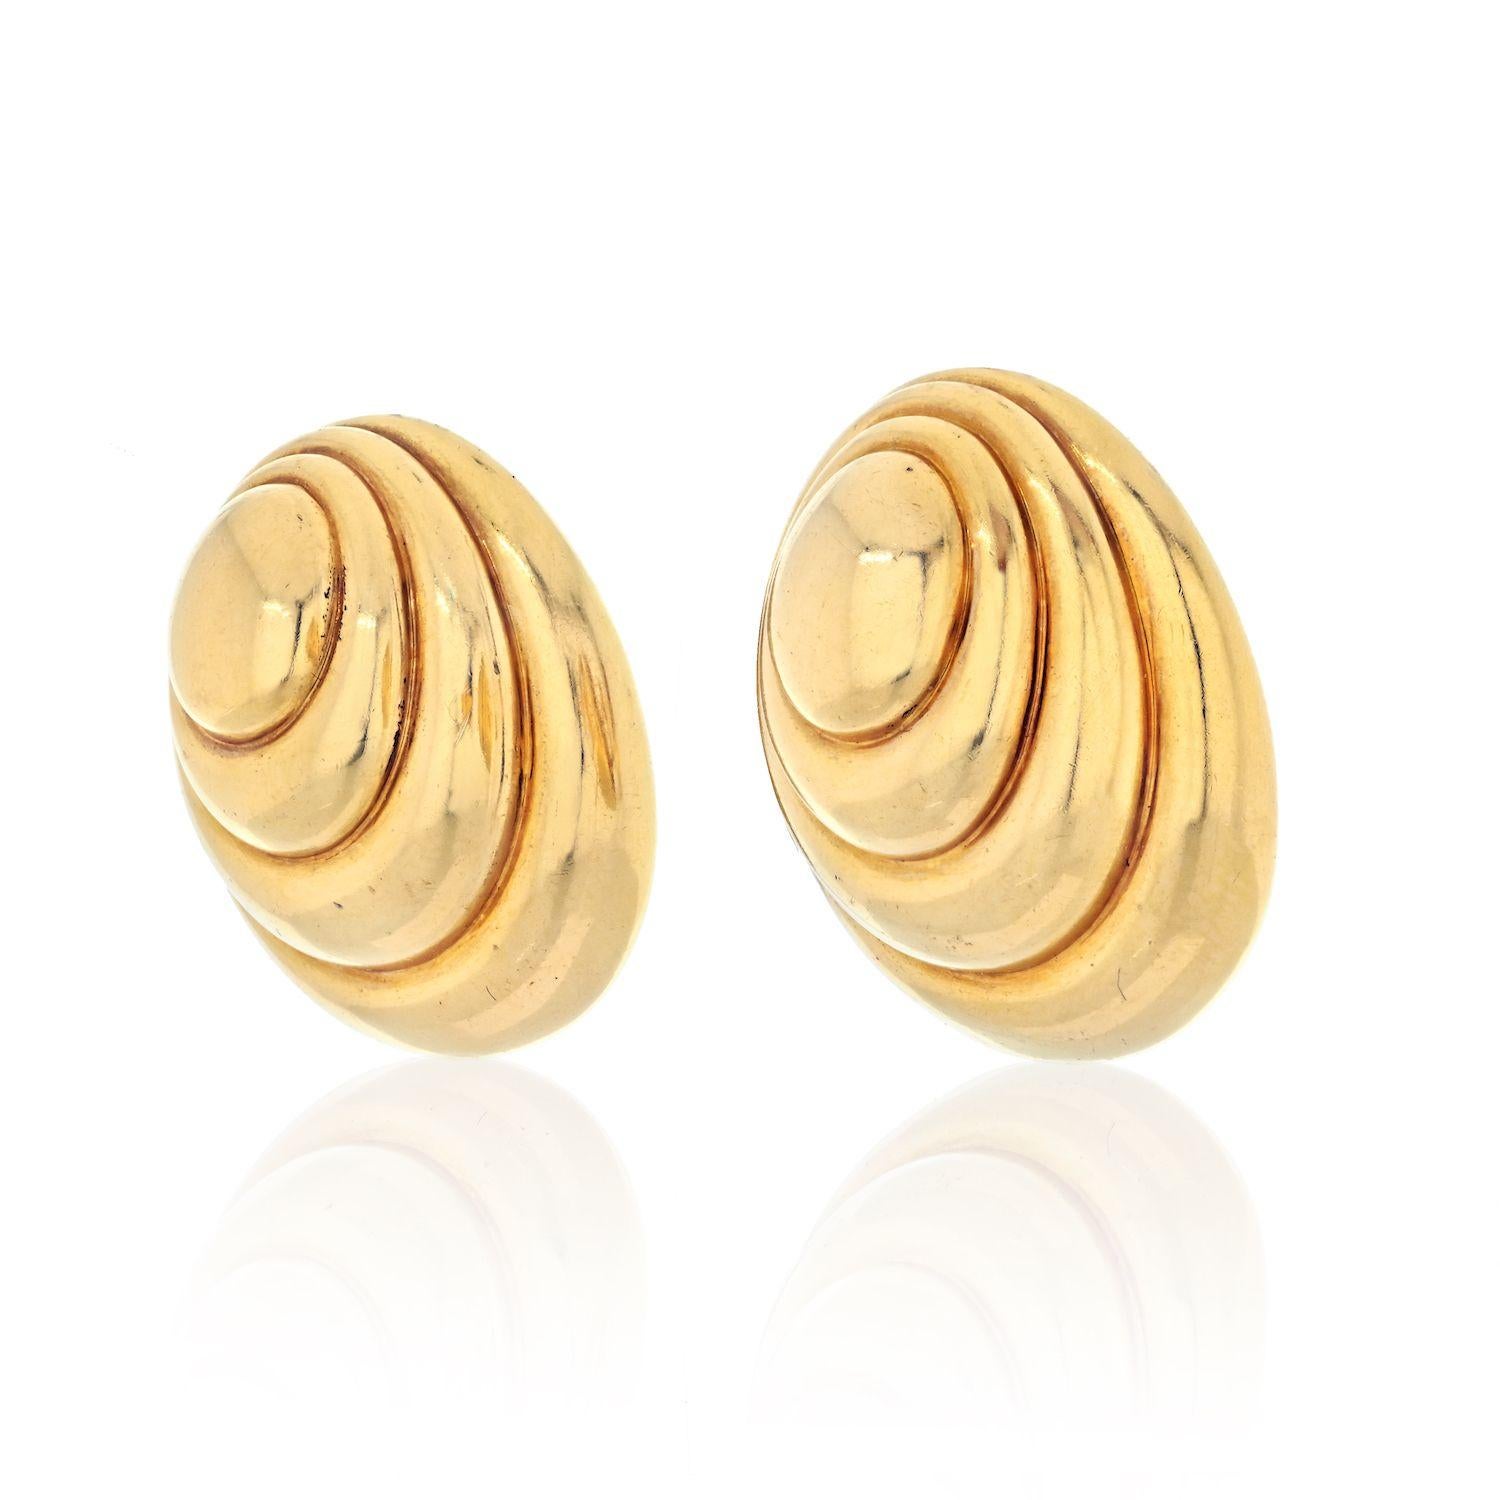 Oversized earrings is what David Webb is known for. You won't be unnoticed wearing these stricking 18k gold spiral dome earrings. High polished yellow gold has a special shine that everyone will see a mile away.  
Secured by a solid clip back, fully